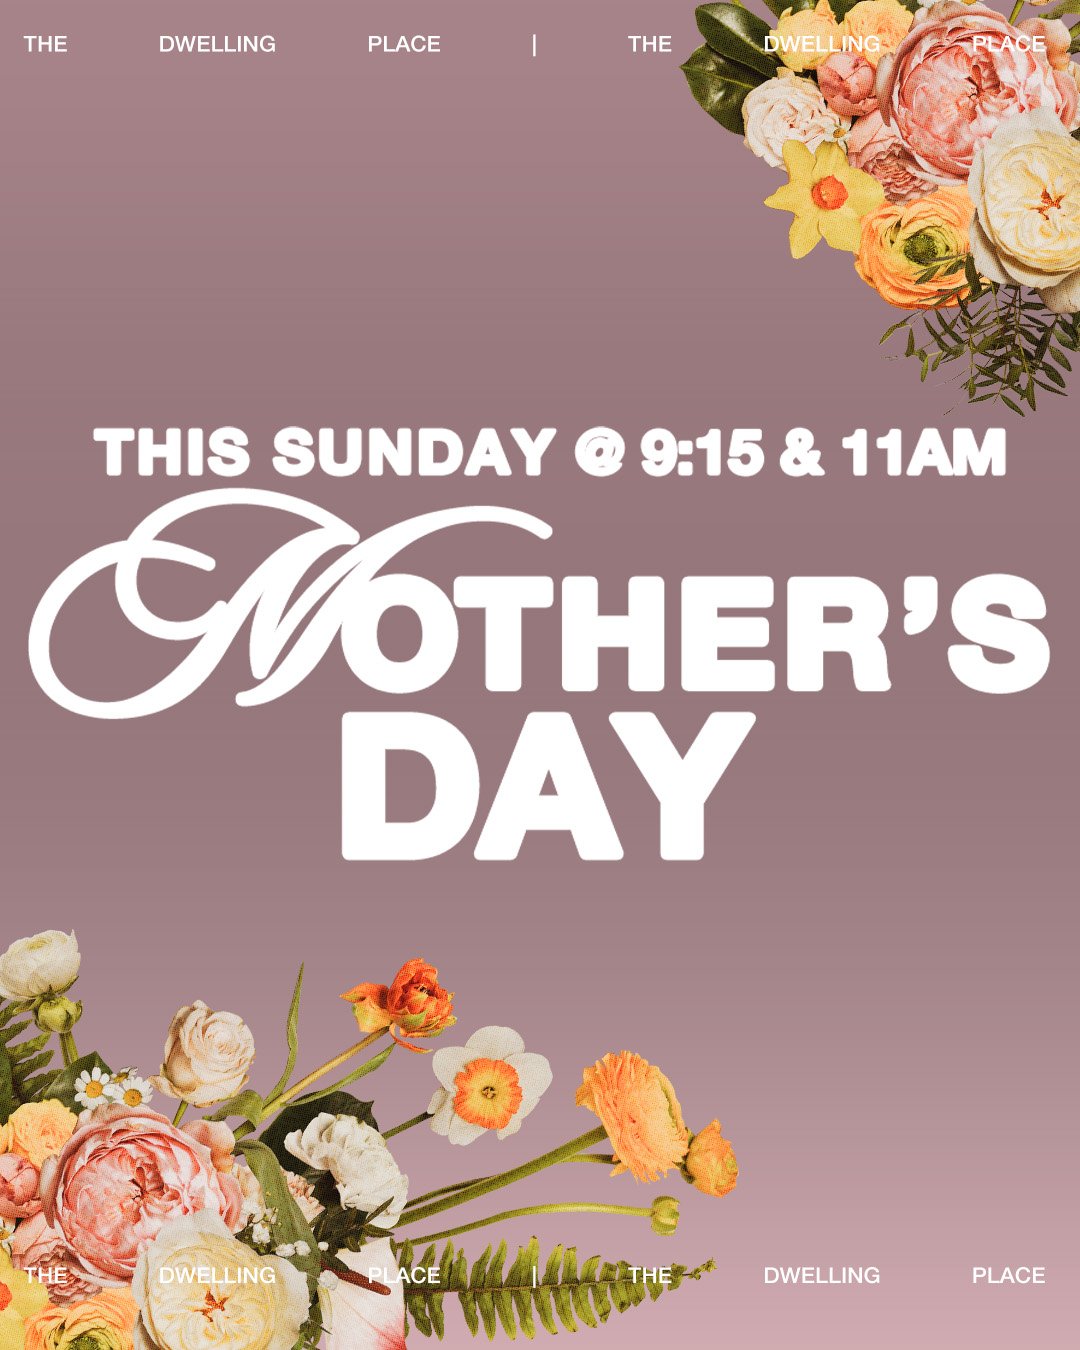 This Sunday we invite you to our Mother's Day service! Whether you are a mom, long to be a mom, are celebrating your own mom, or have grief surrounding the idea of motherhood, you are welcome here.